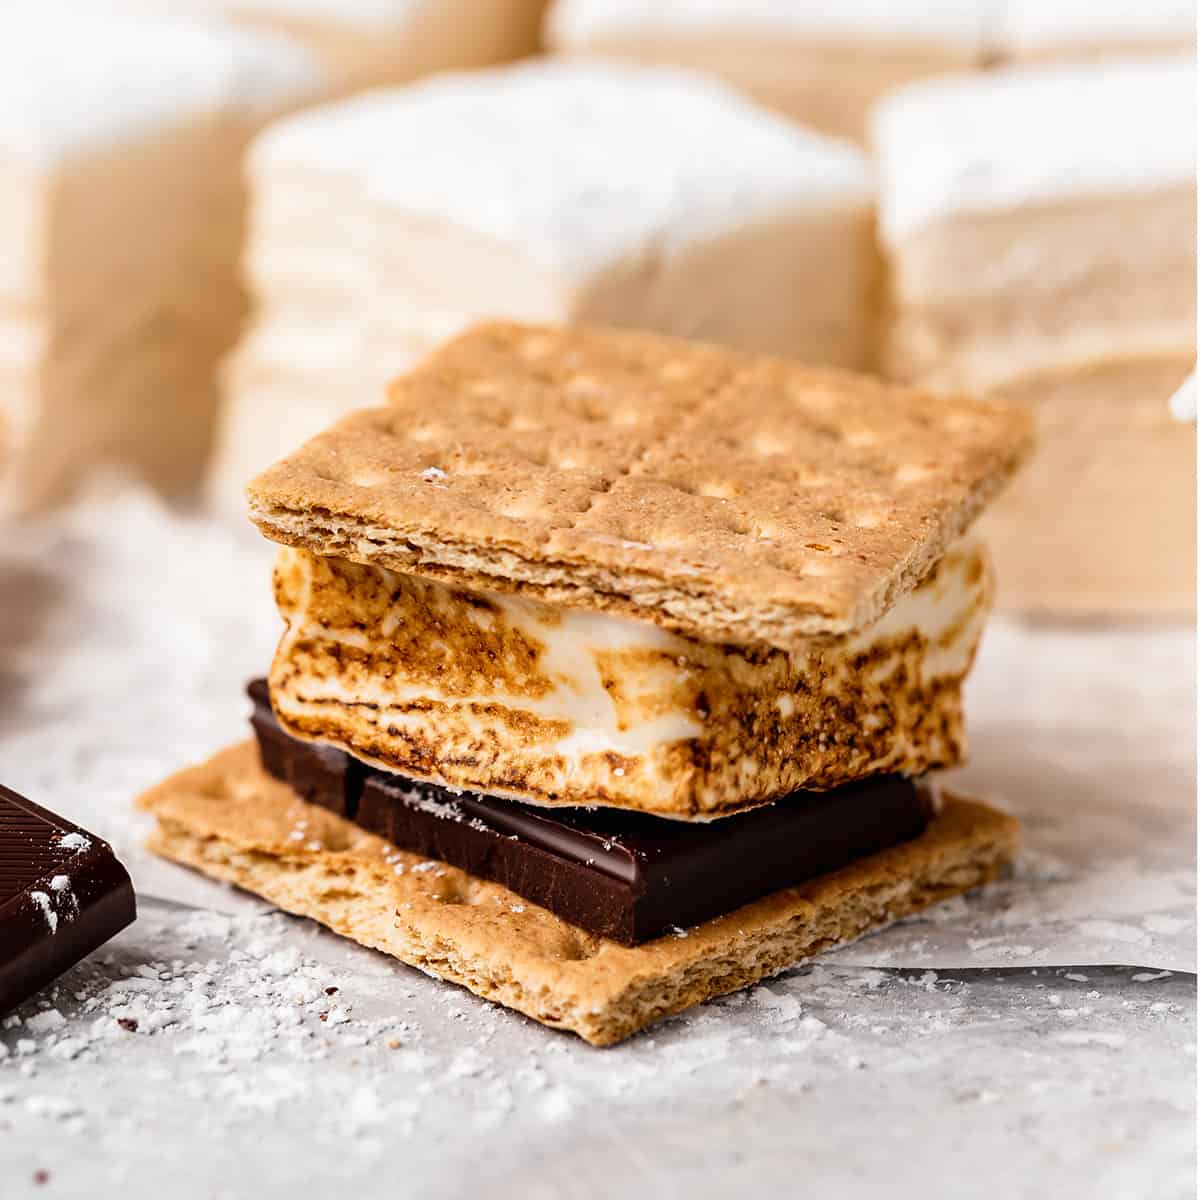 a s'more with a homemade marshmallow